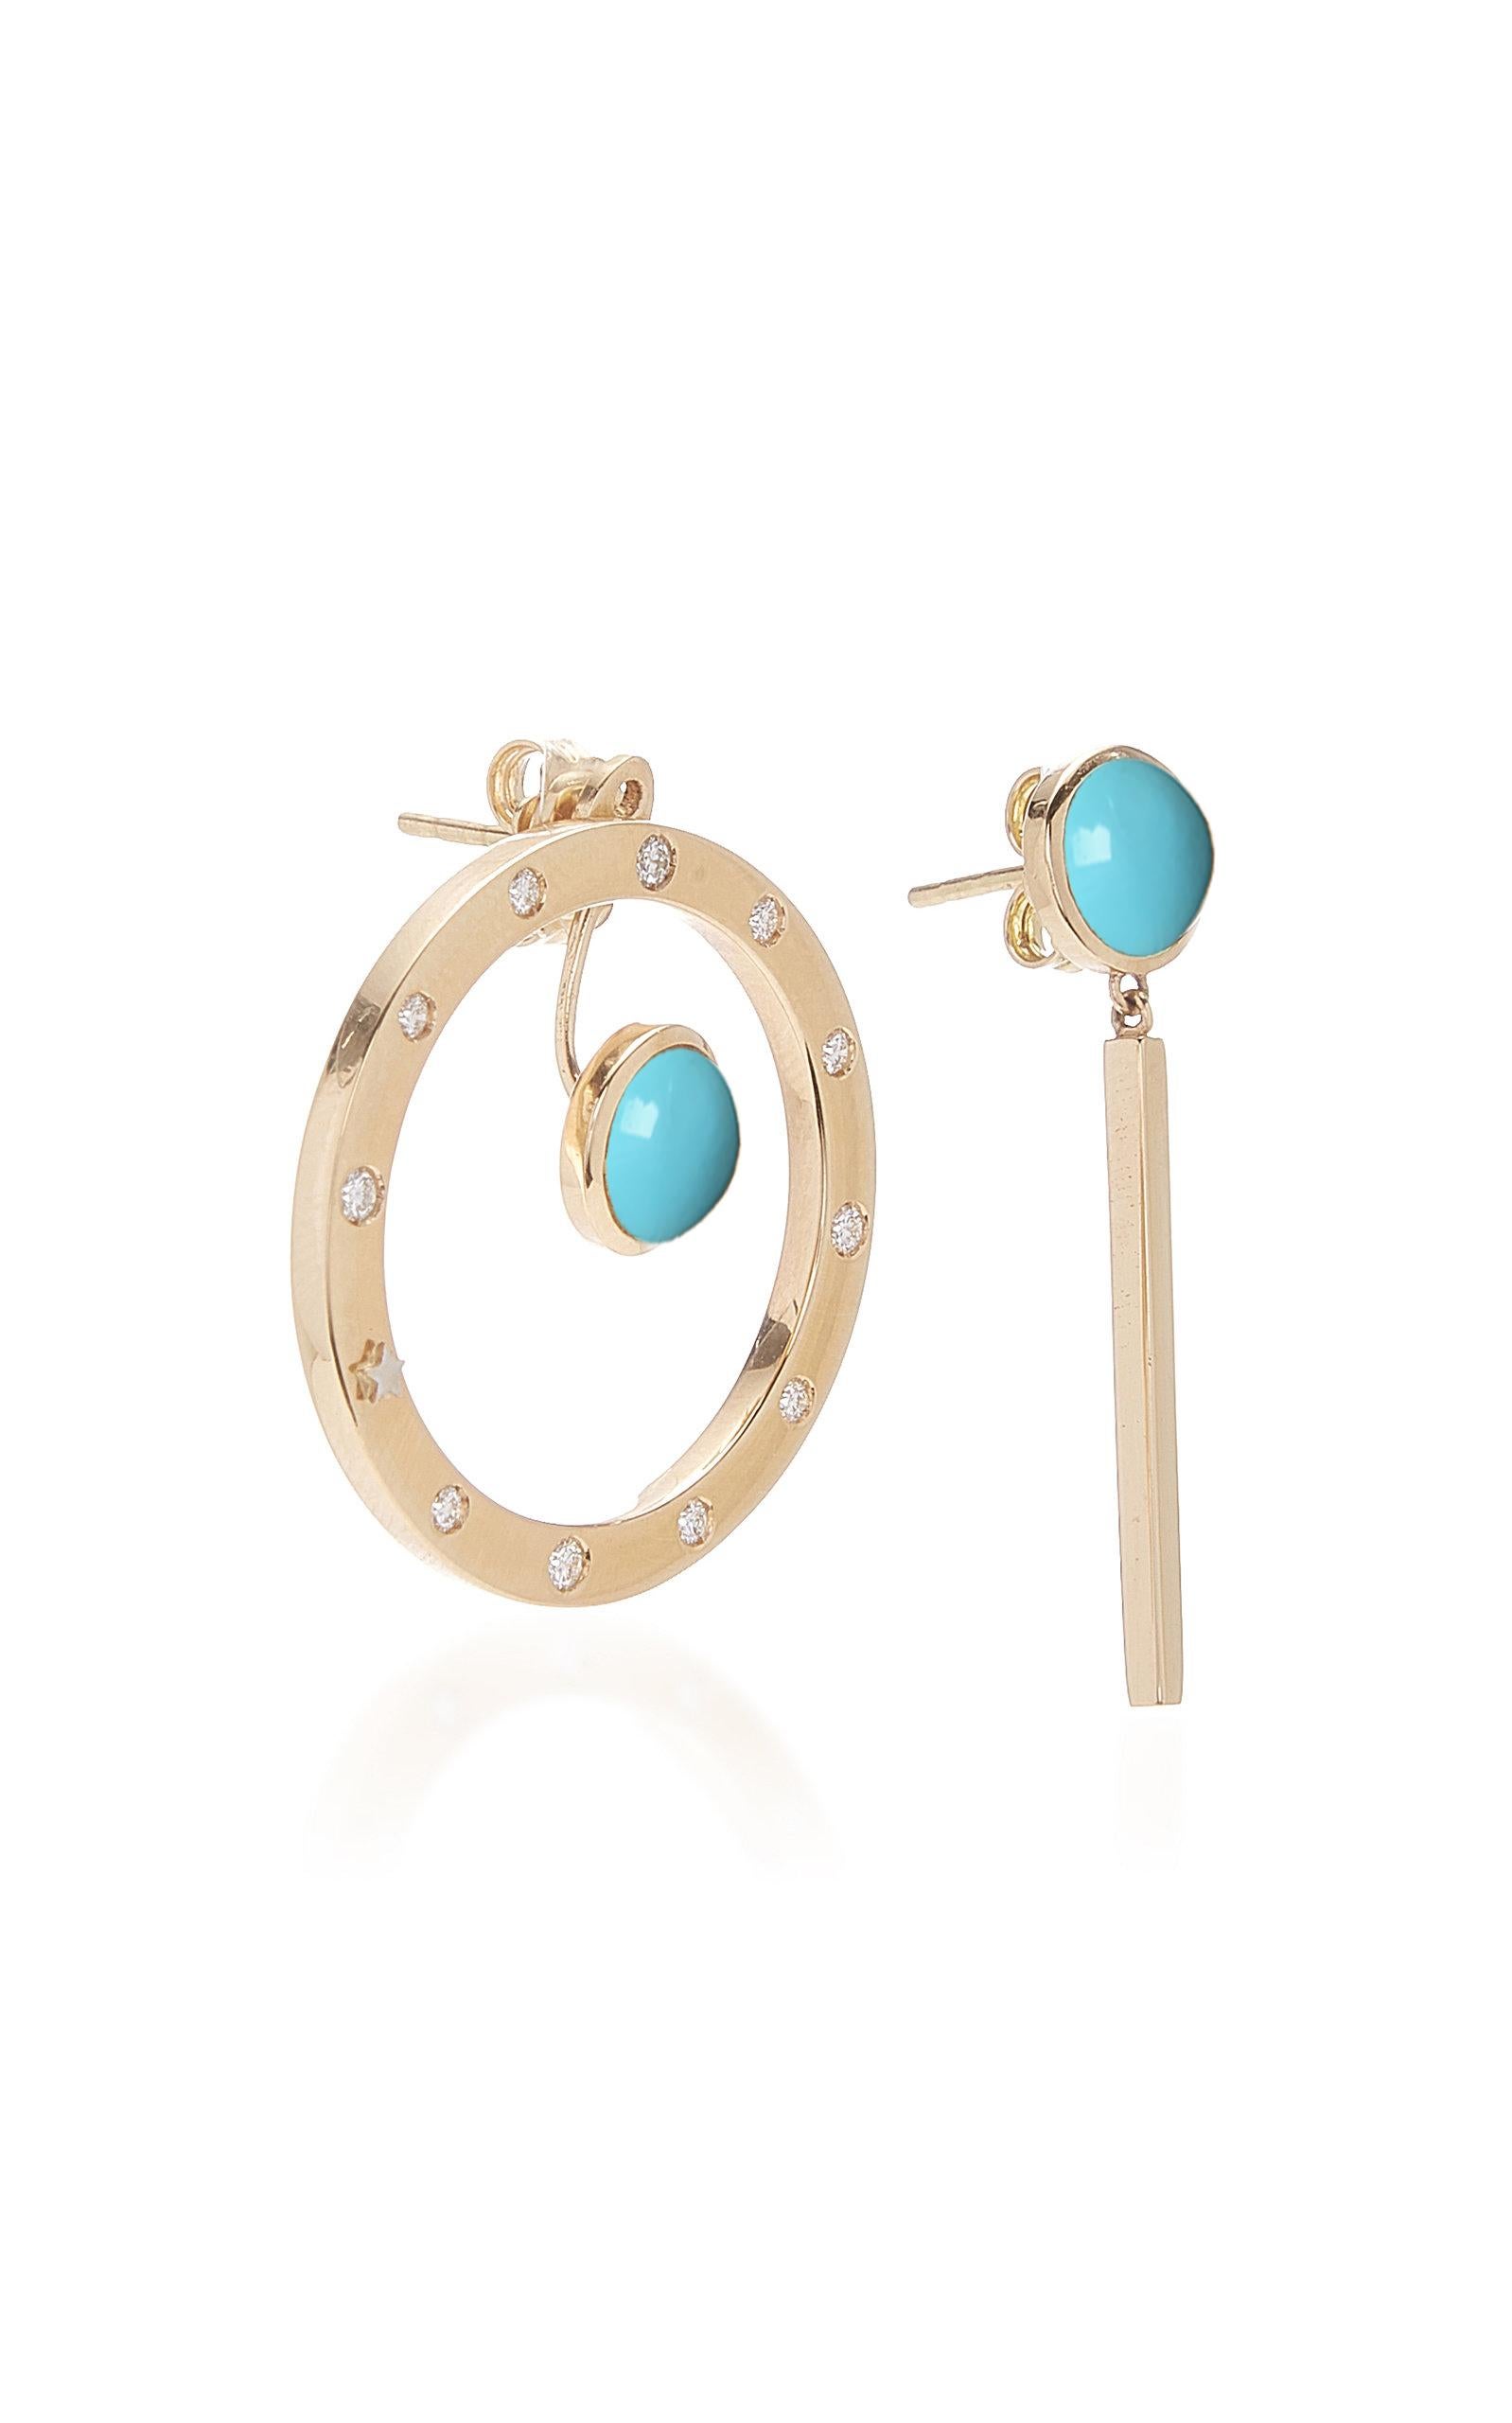 ORA Collection.
Inspired by the concept of time, Anna Maccieri Rossi's 'ORA Earrings' feature a mismatched pair with circular hoop and linear drop, both with natural turquoise cabochons. The 11 white diamonds and a gold star at 8 o'clock around the